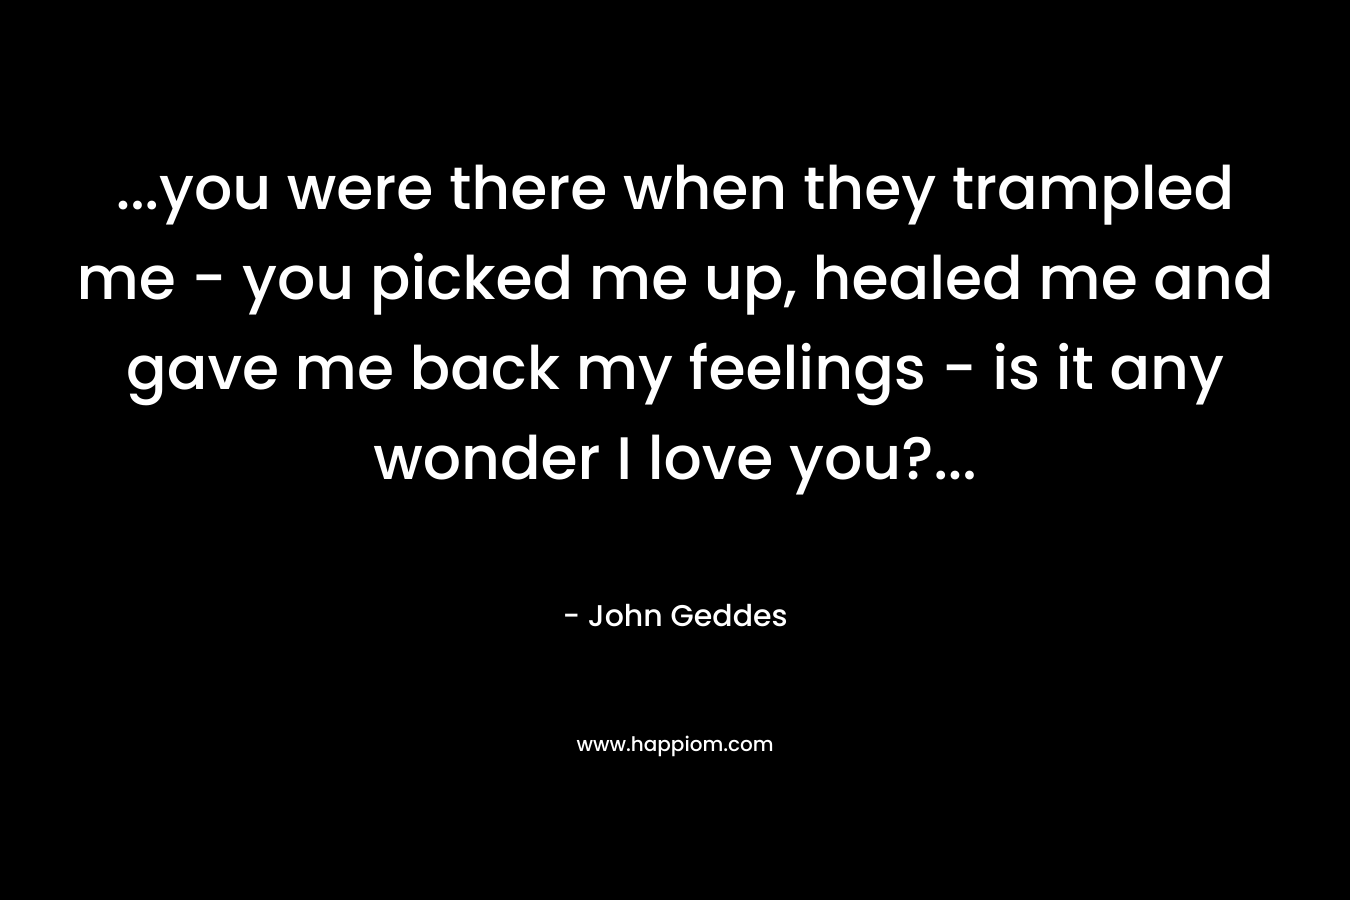 ...you were there when they trampled me - you picked me up, healed me and gave me back my feelings - is it any wonder I love you?...